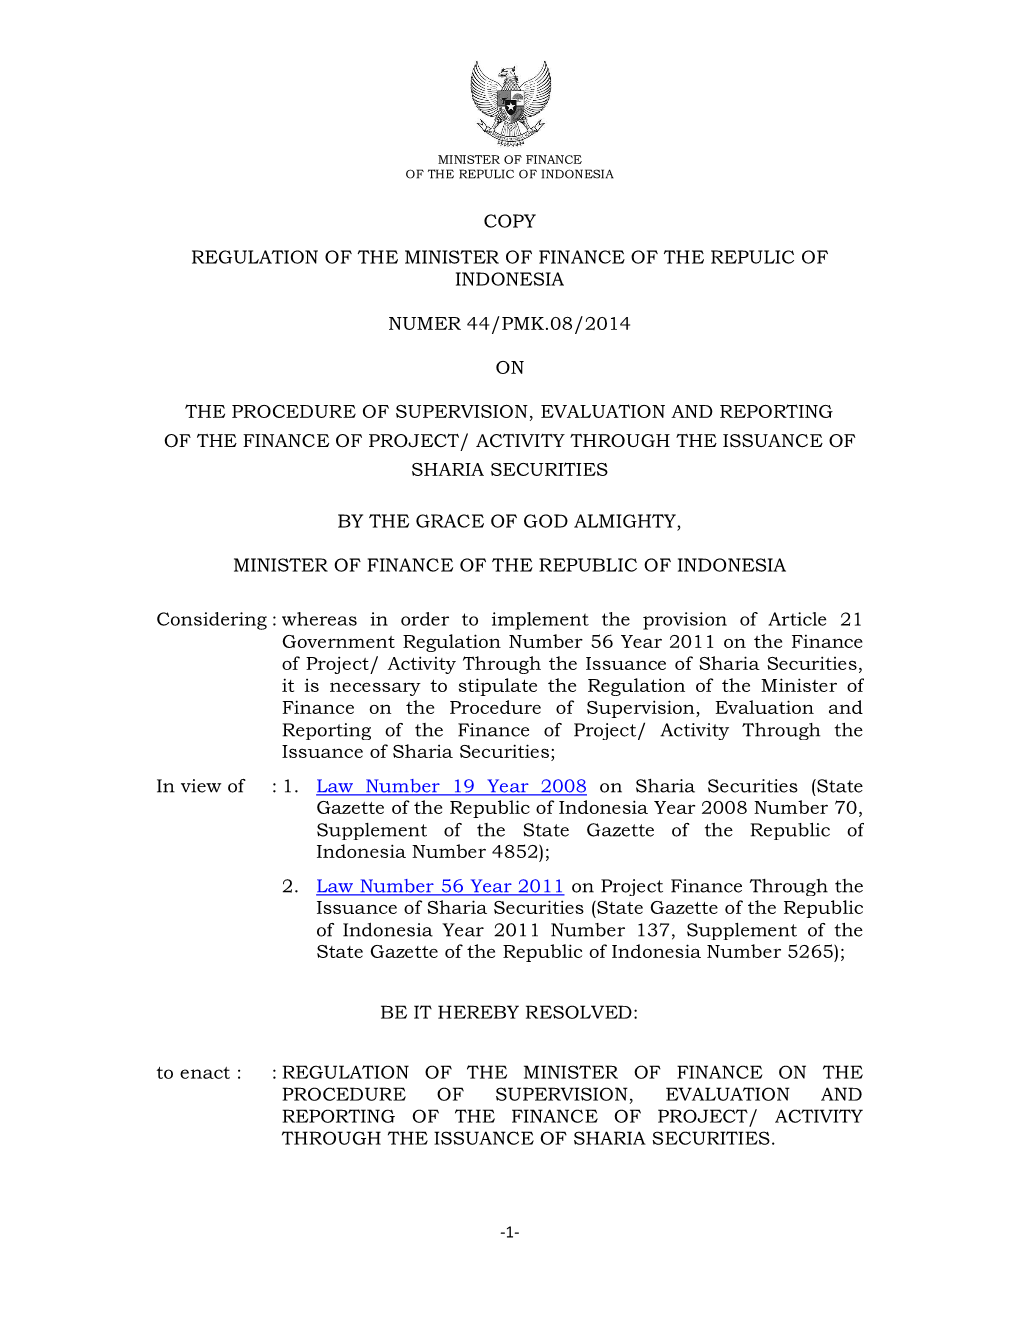 Copy Regulation of the Minister of Finance of the Repulic of Indonesia